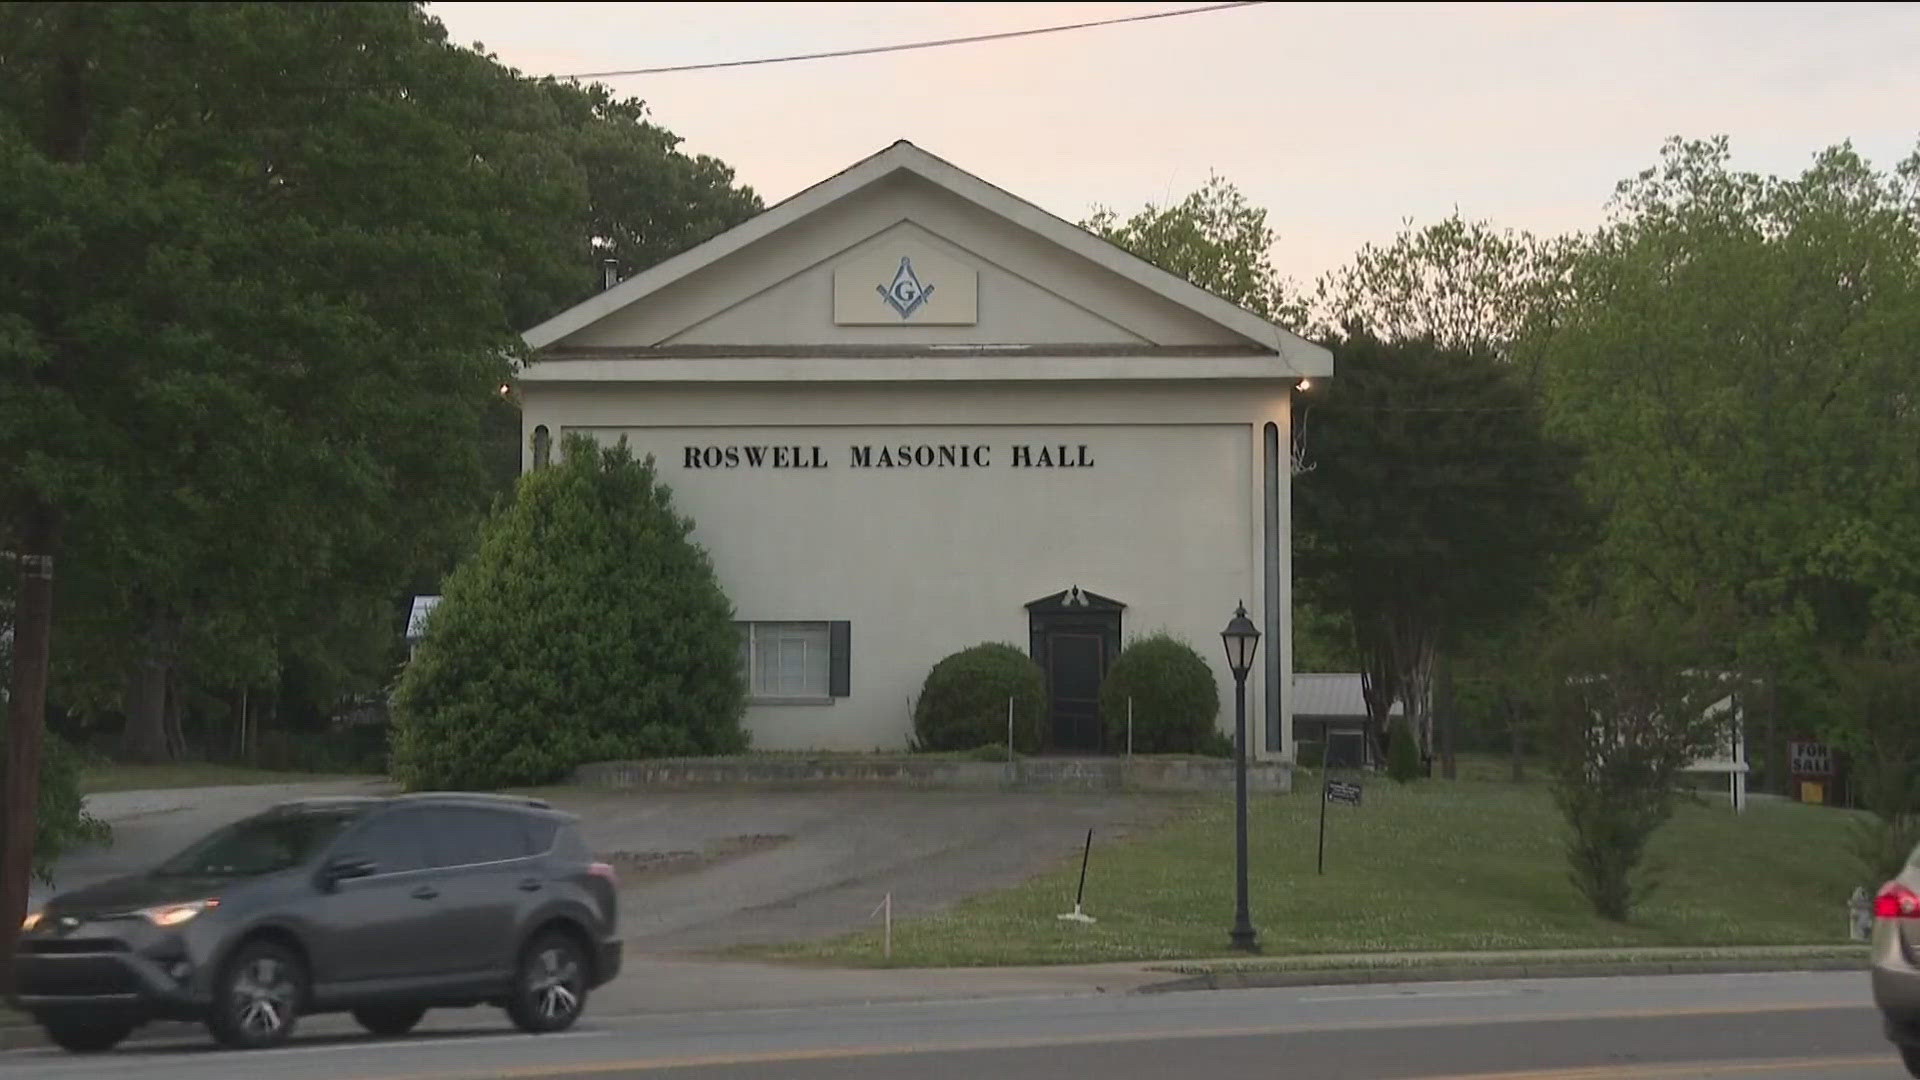 A former mayor says over 500 people signed a petition to save the Roswell Masonic Hall.